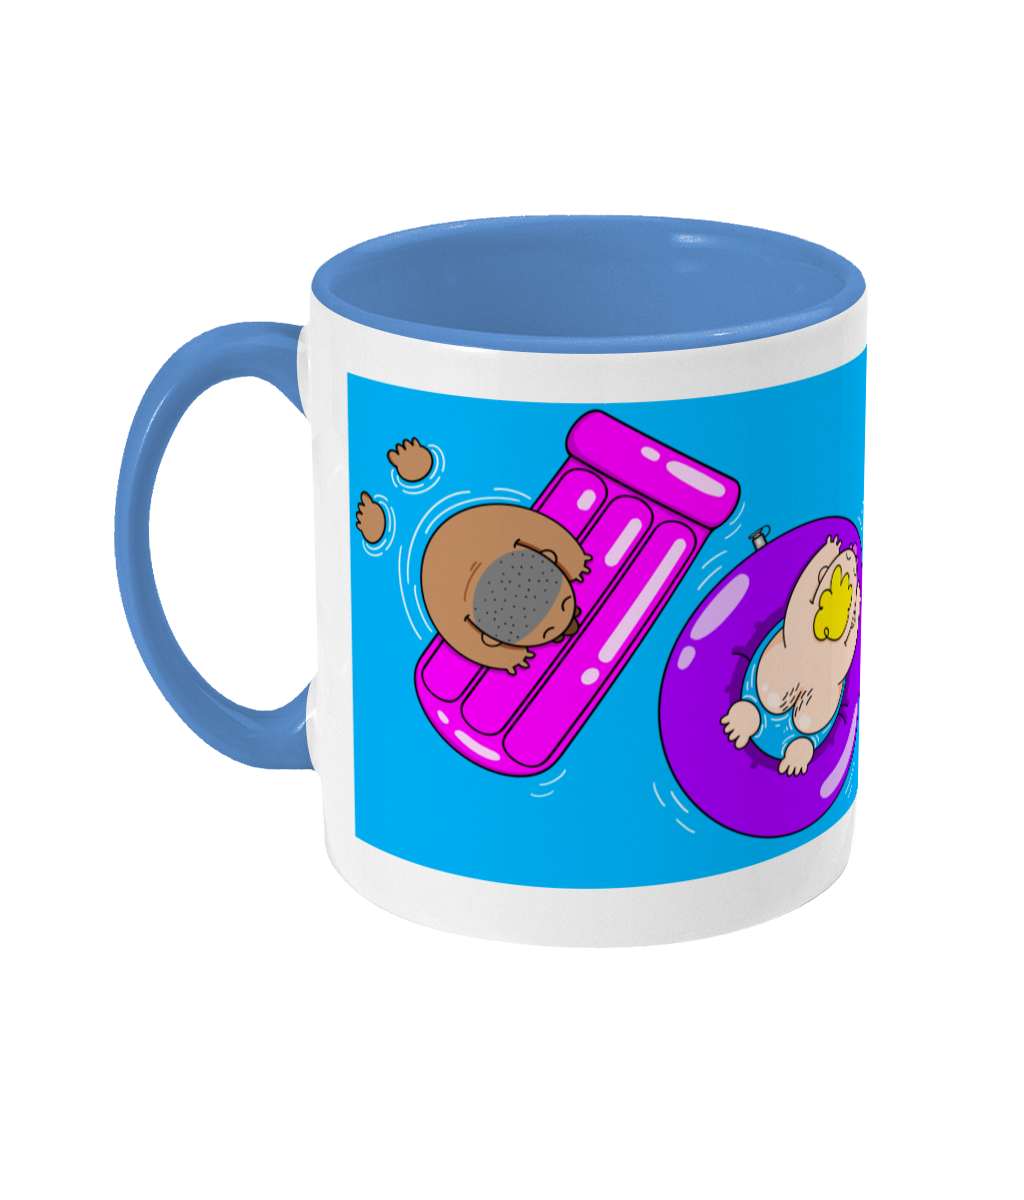 Four gay bears splashing around on colourful inflatables on a blue and white mug